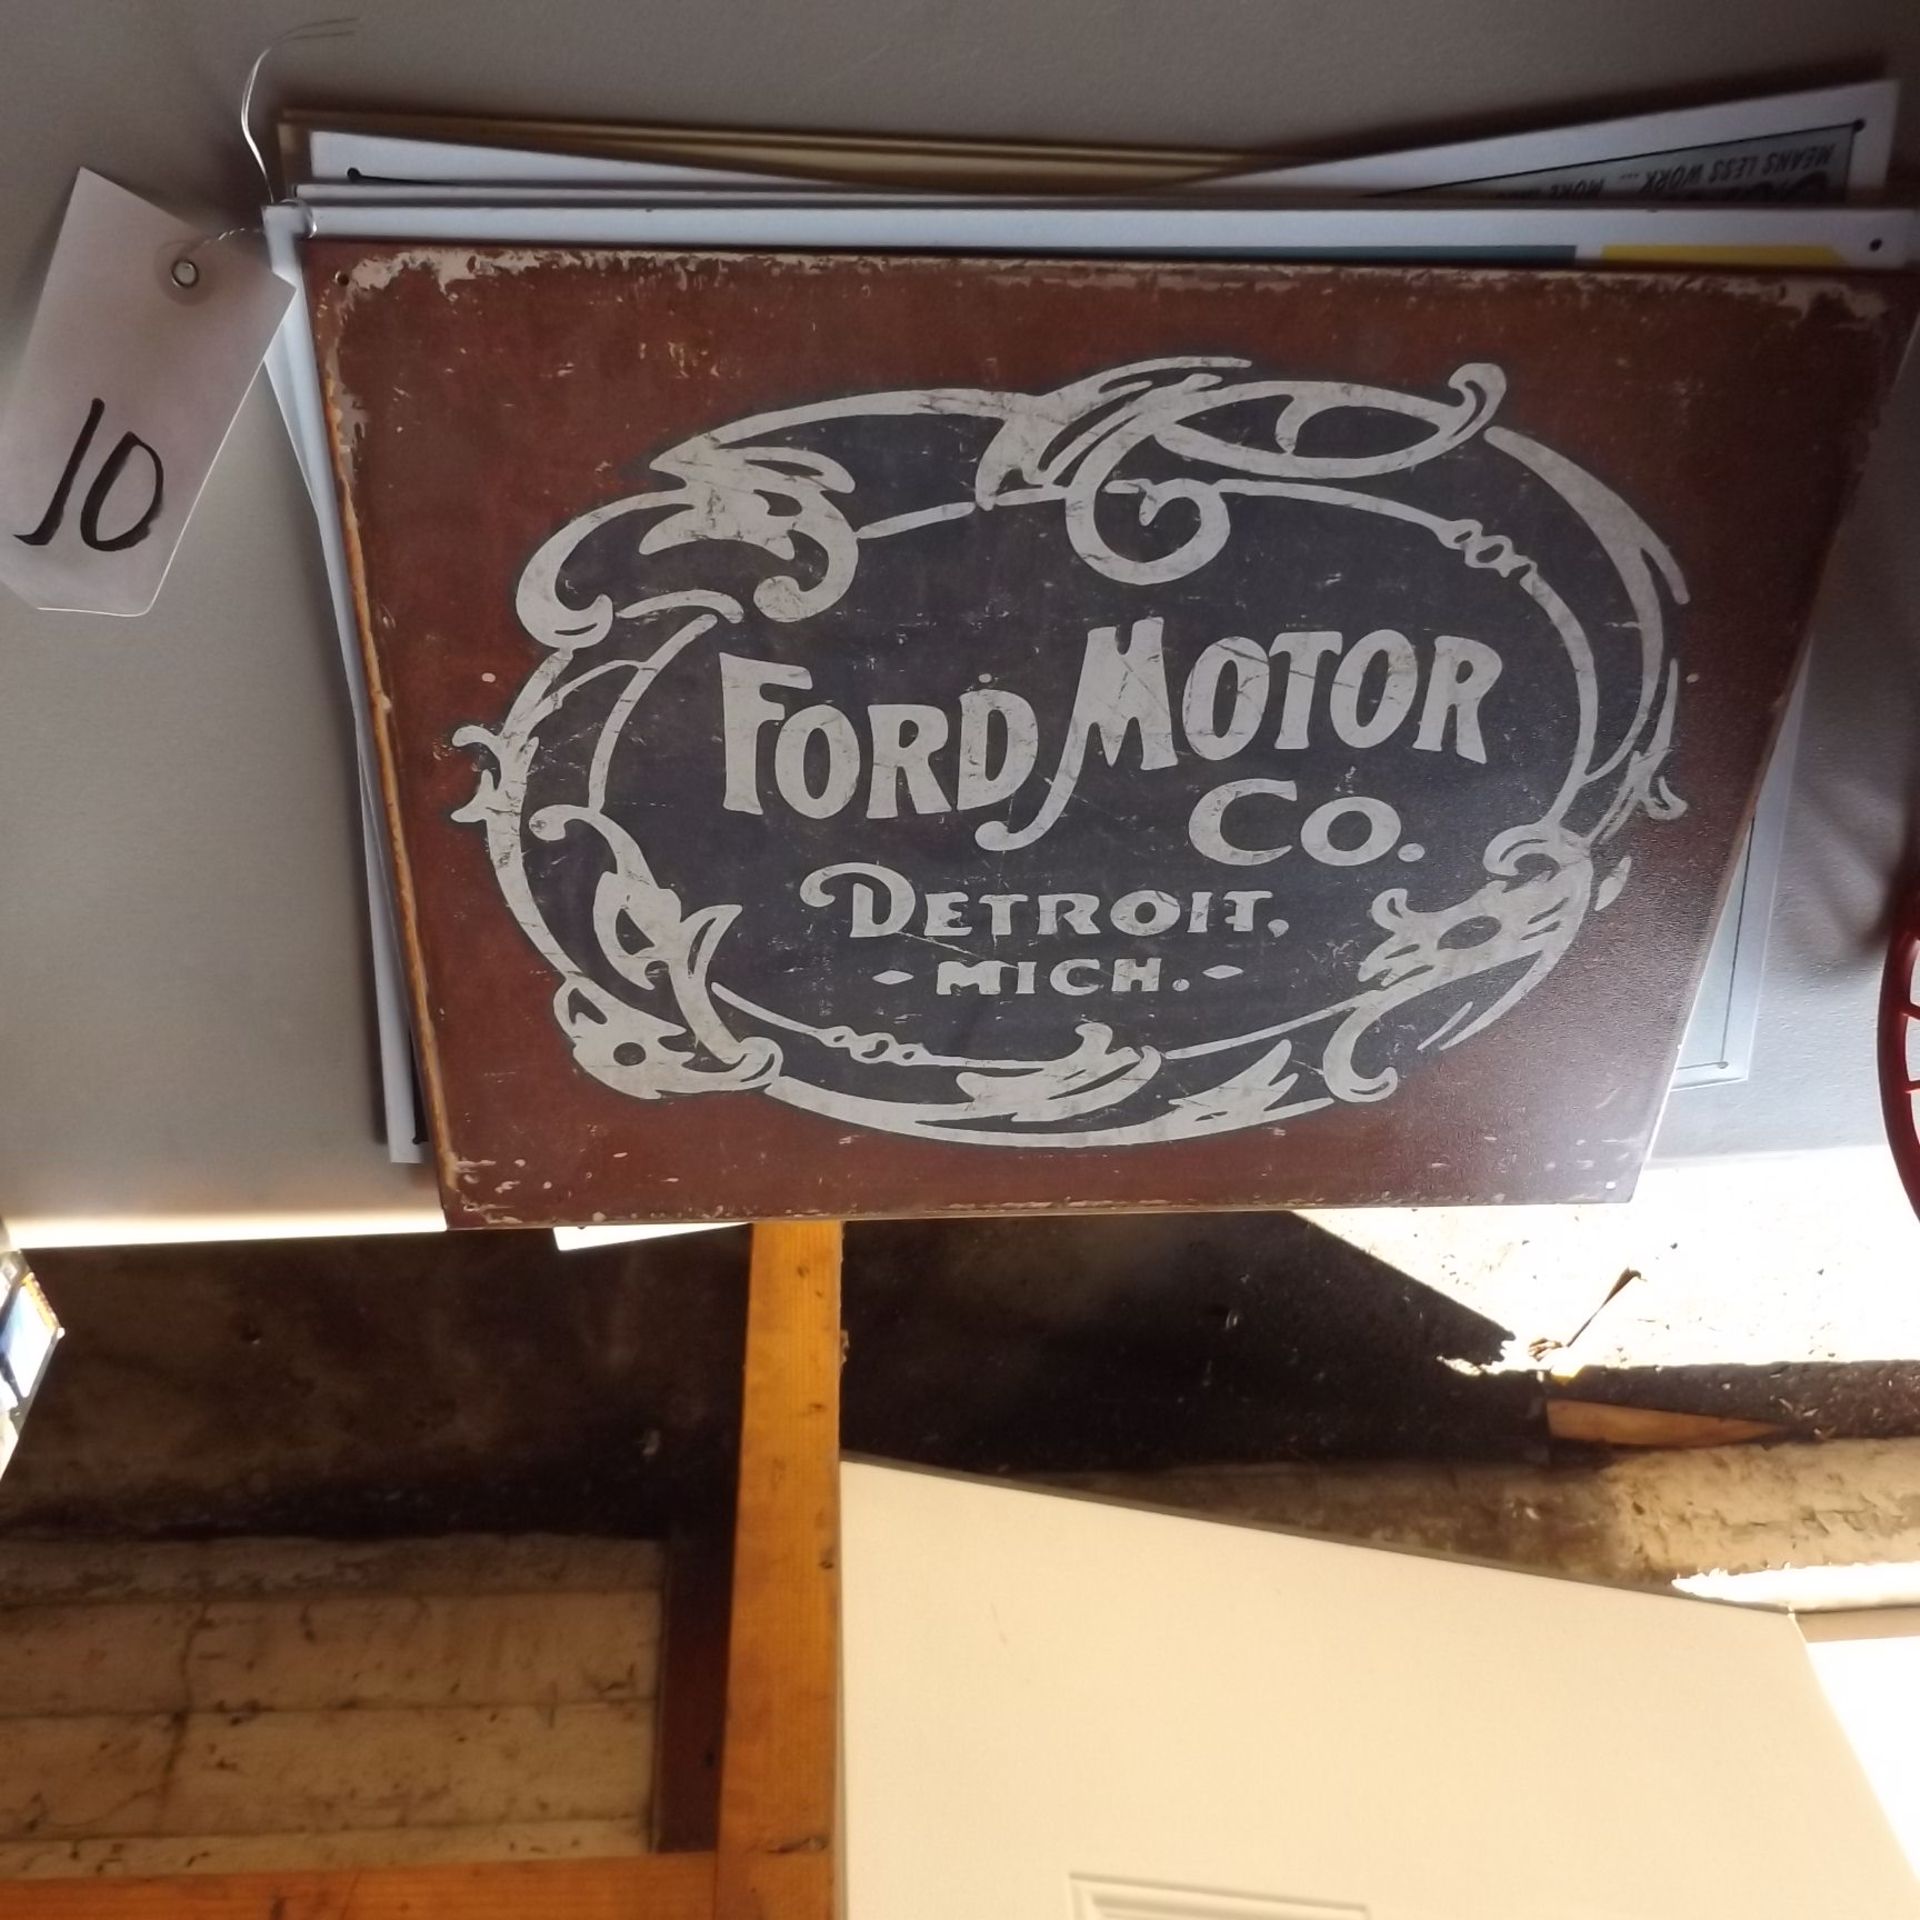 Ford Signs